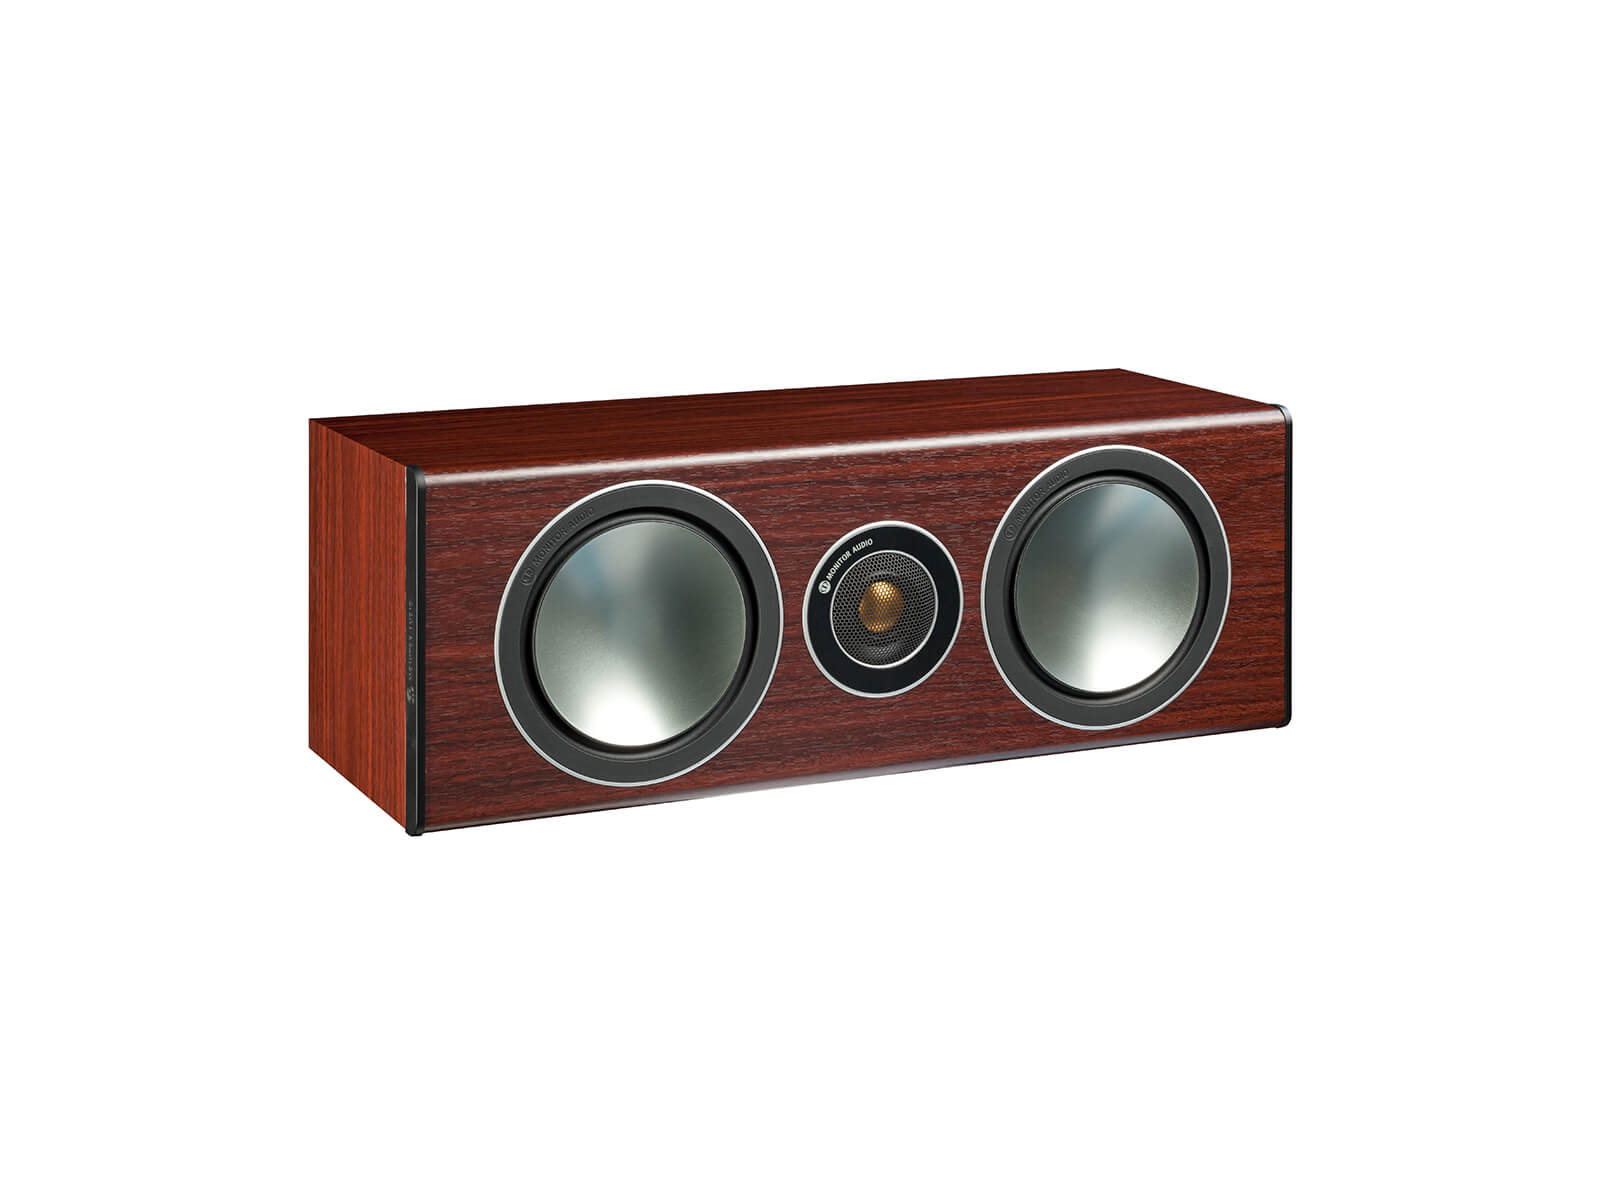 Bronze Centre, grille-less centre channel speakers, with a rosemah vinyl finish.